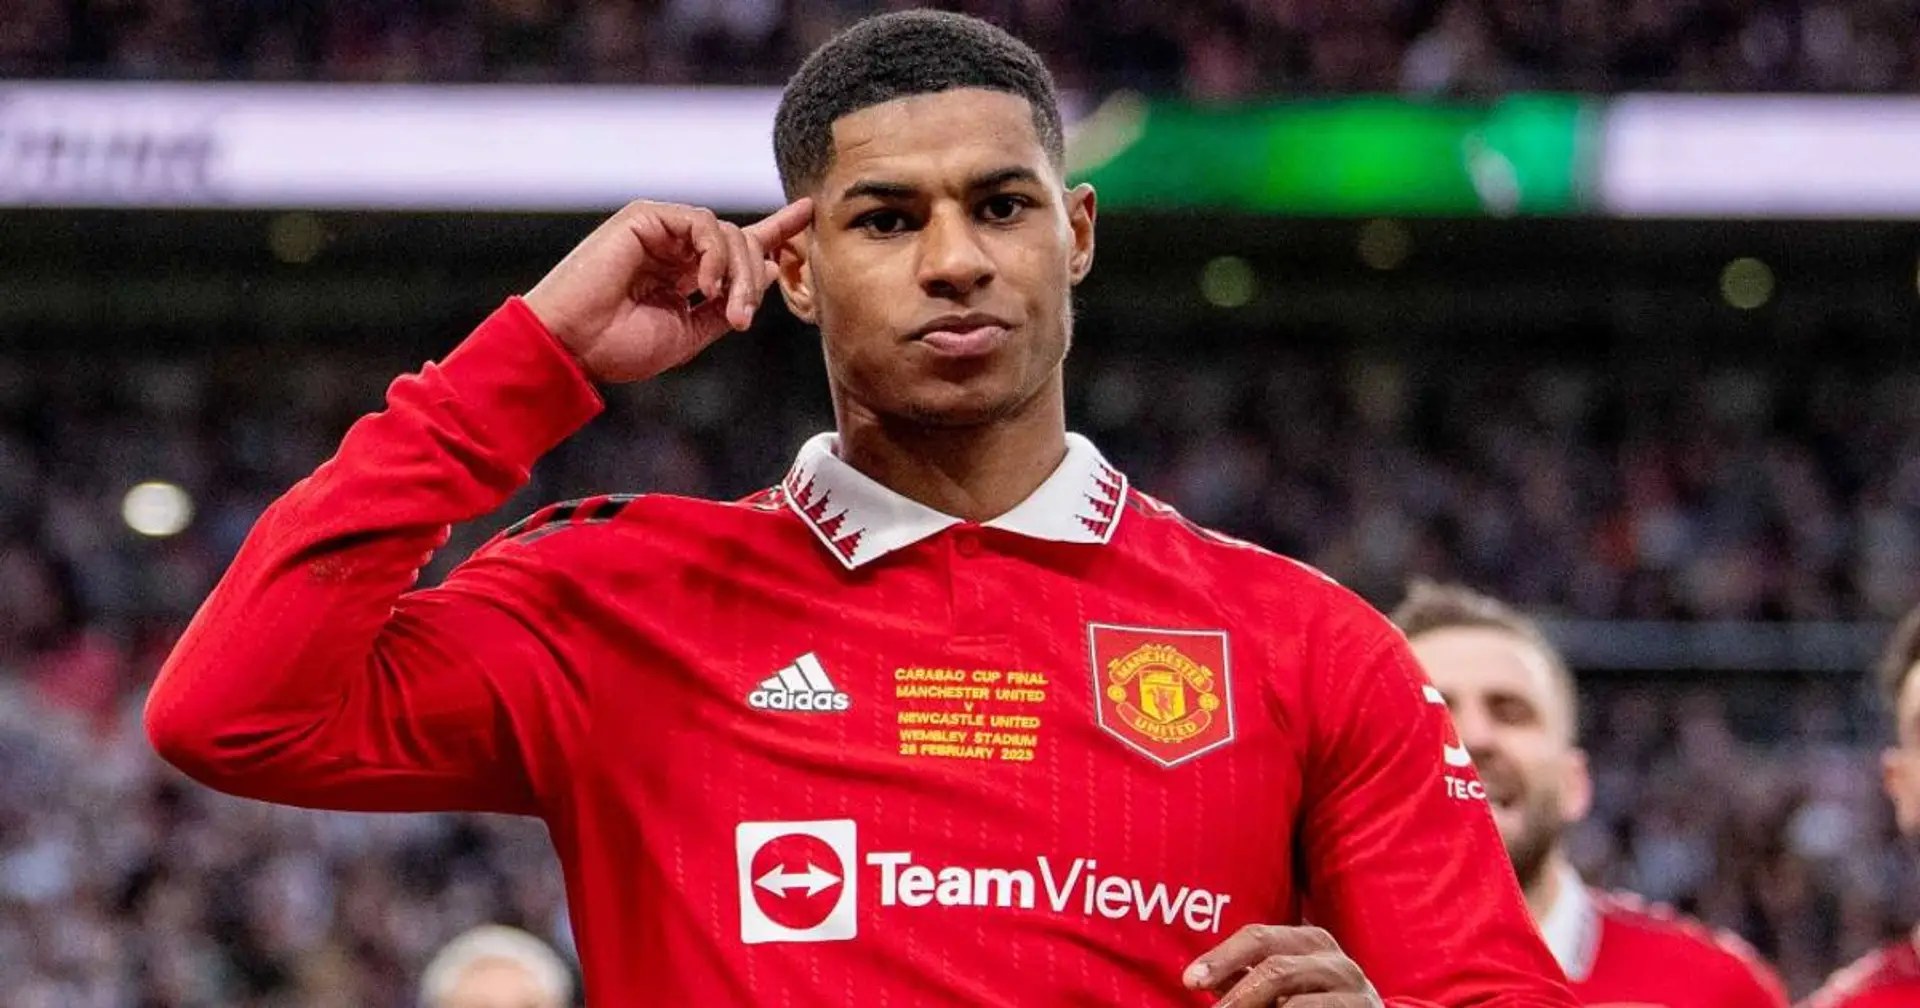 It's official! Marcus Rashford credited with second goal in Carabao Cup final